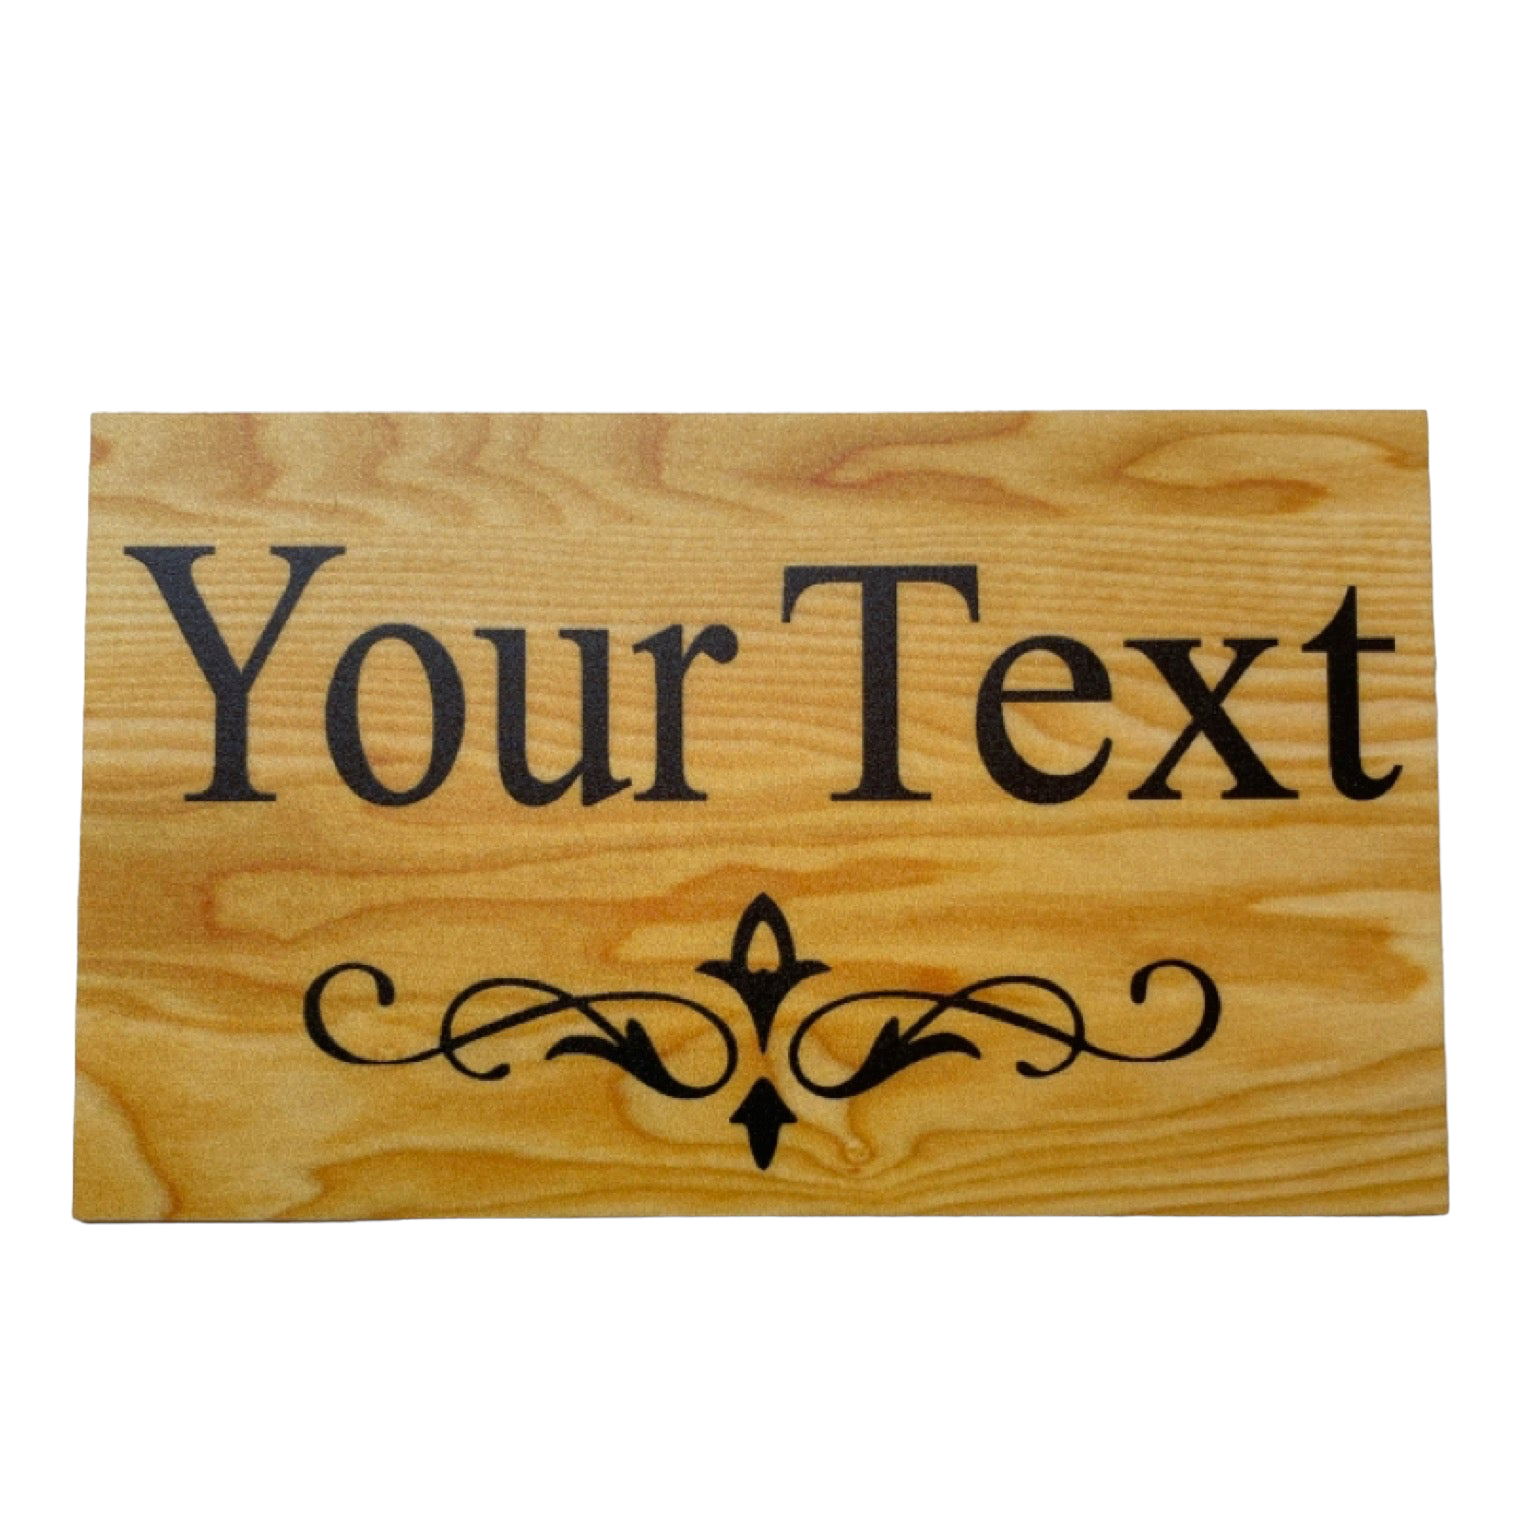 Timber Style Your Text Custom Wording Sign - The Renmy Store Homewares & Gifts 